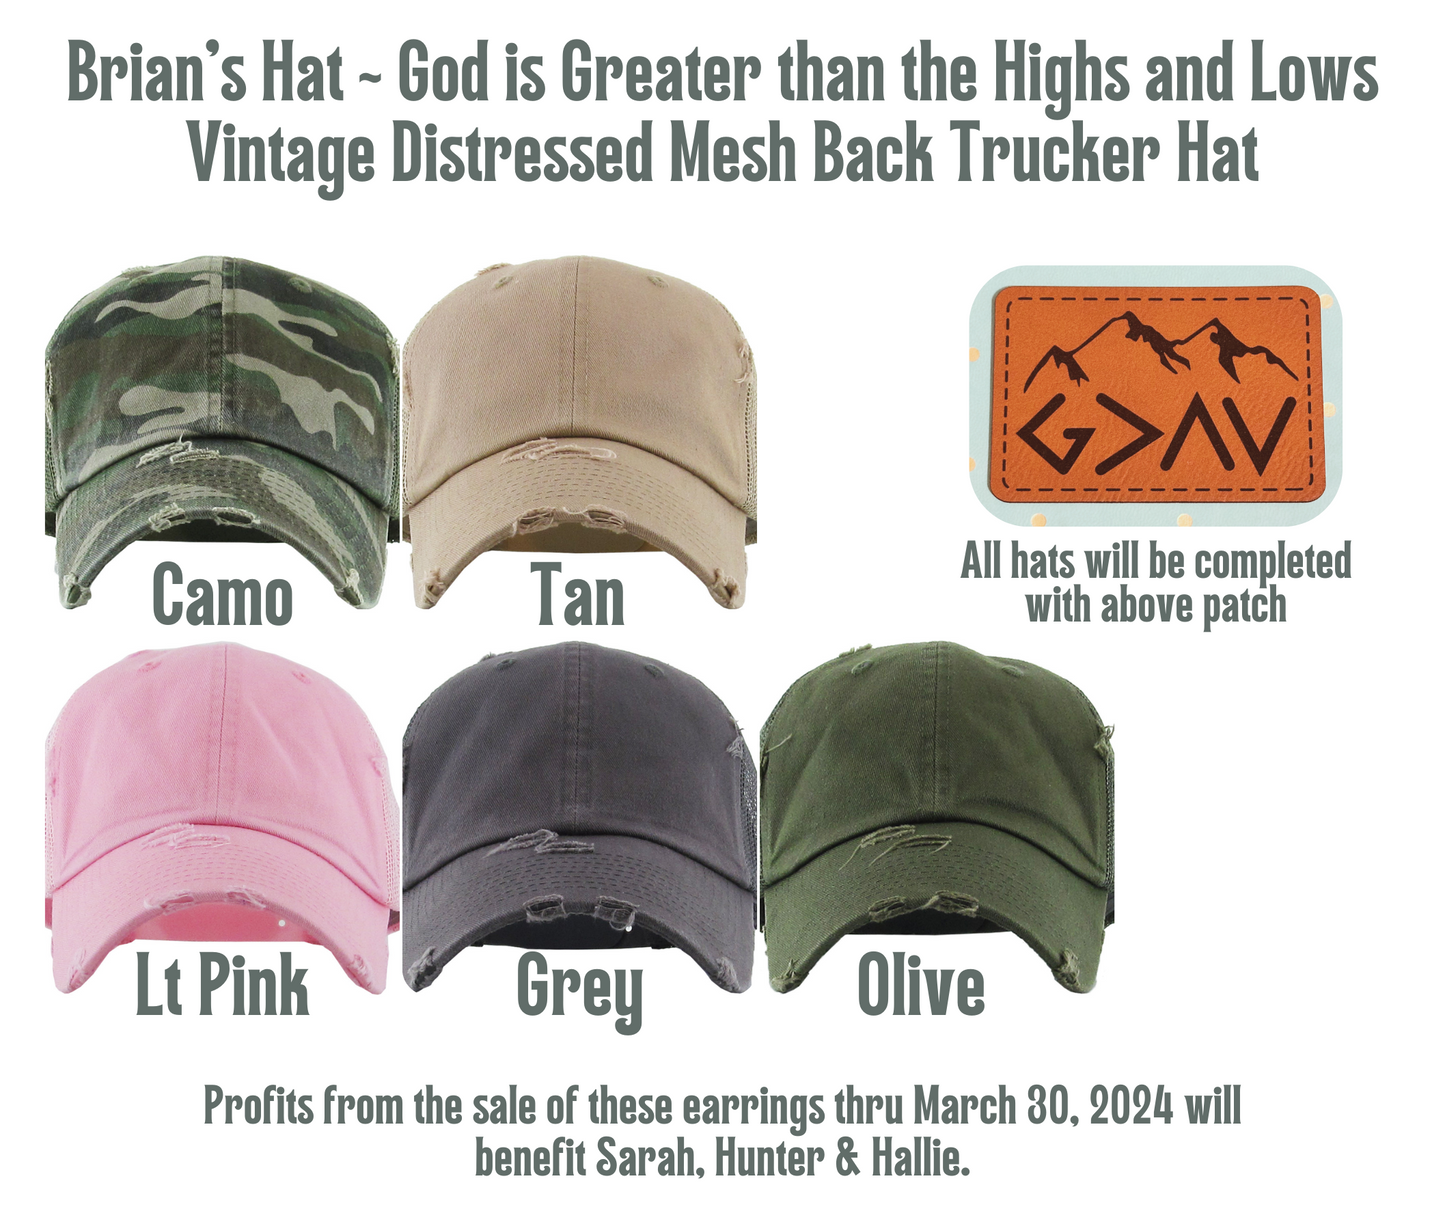 "Brian's Hat" God is Greater than the Highs and Lows Vintage